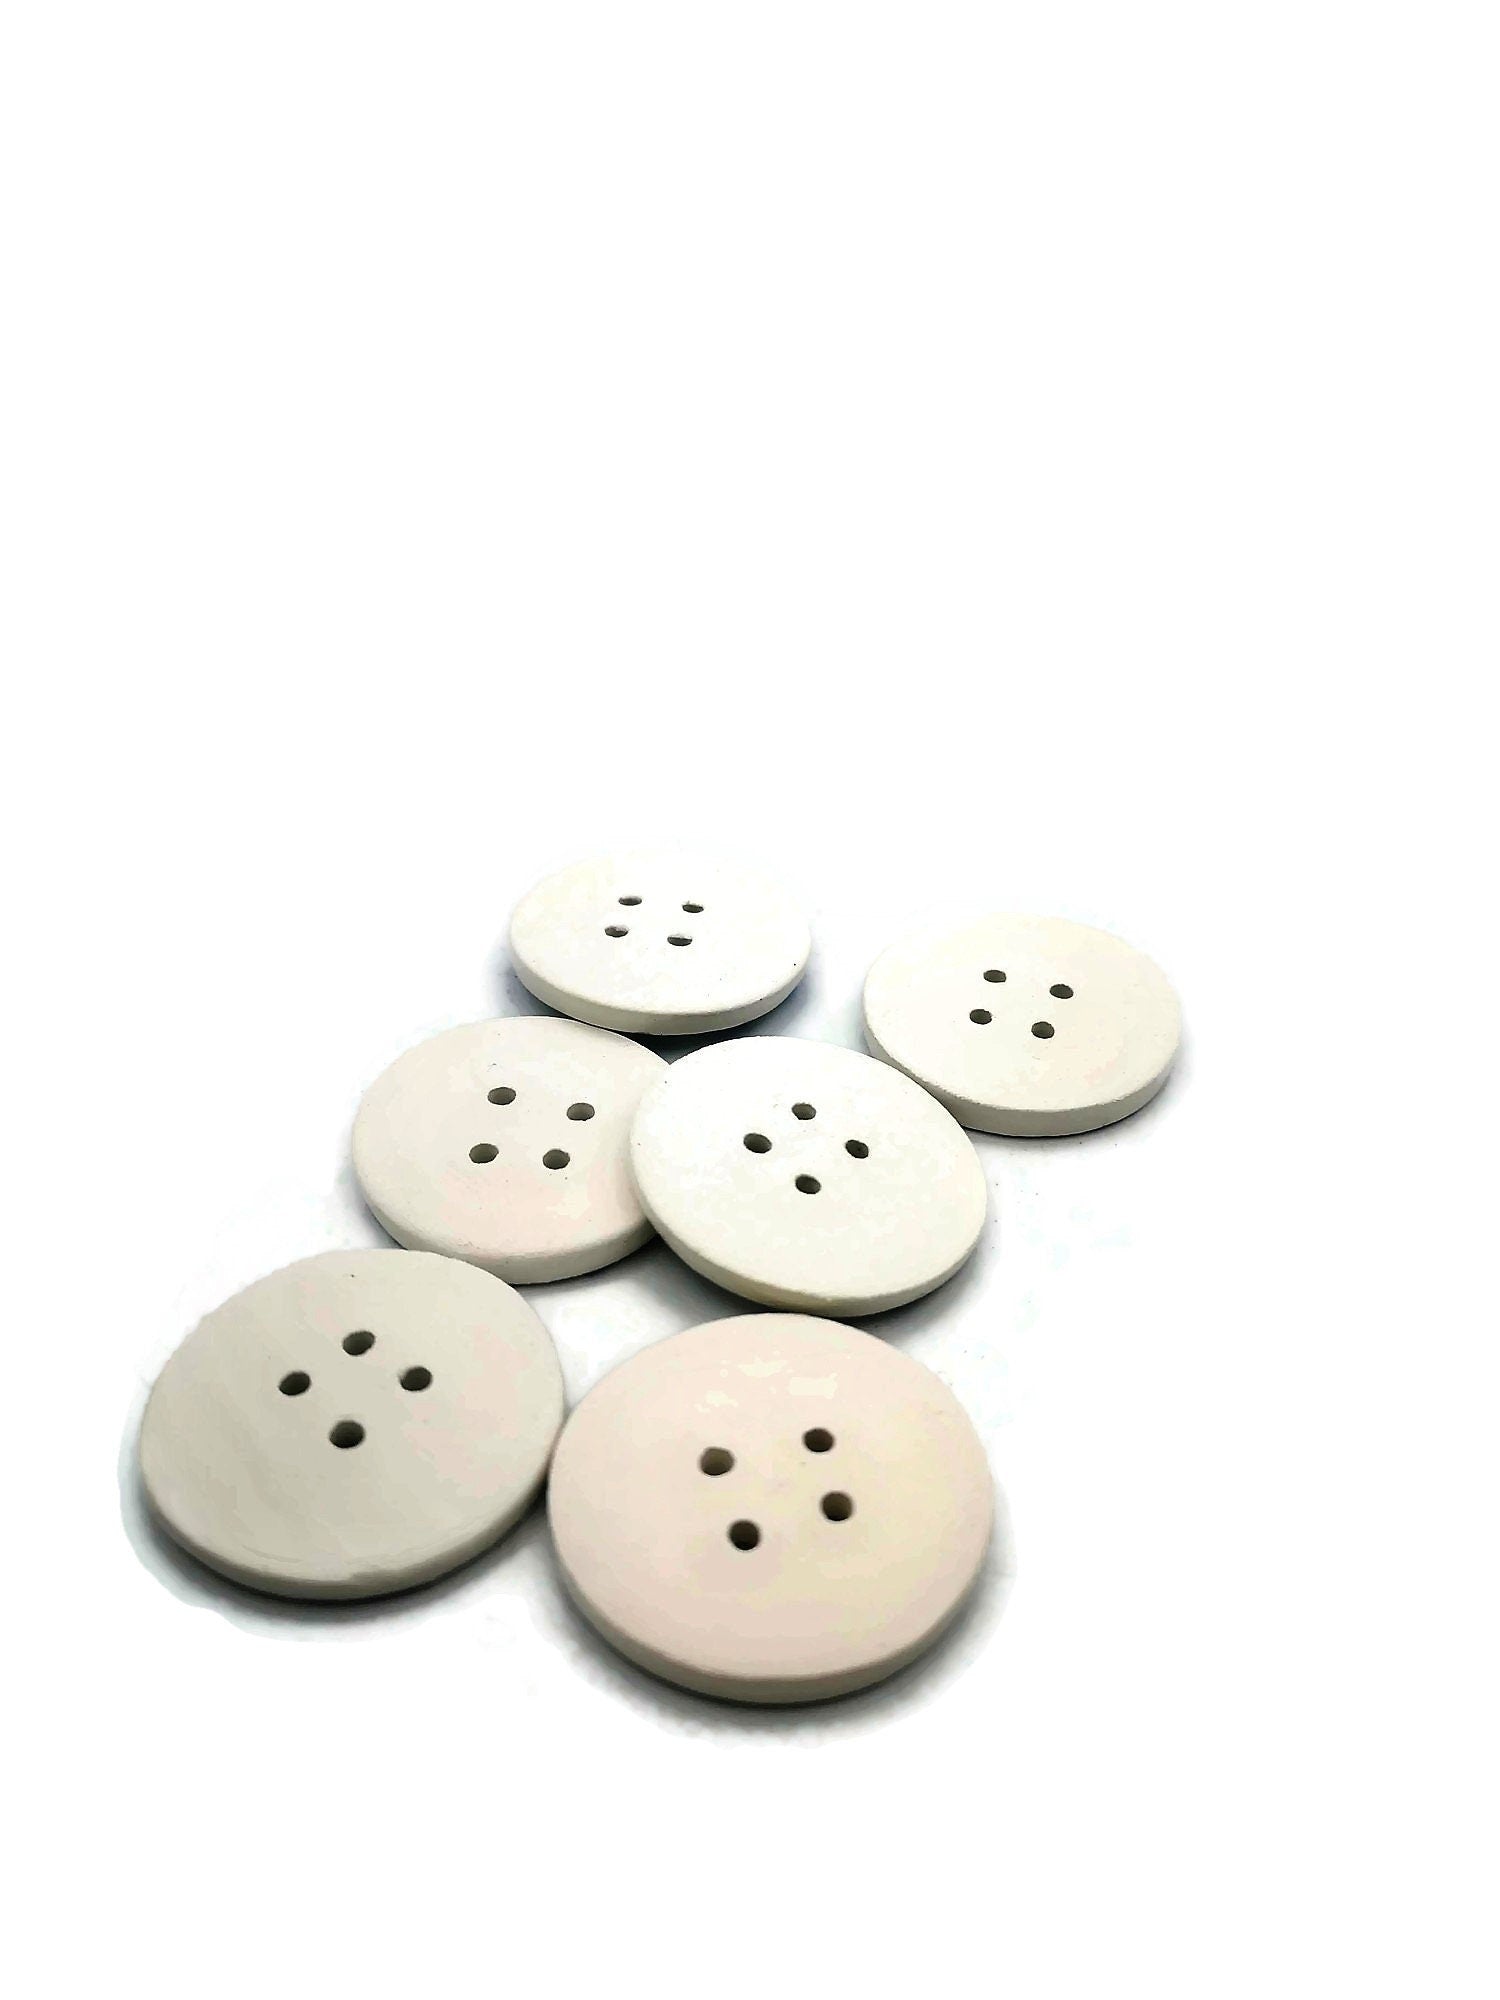 6Pc Large Handmade Ceramic Buttons For Sewing, Hand Painted Antique Look White And Blue Buttons, Best Sellers Sewing Supplies And Notions - Ceramica Ana Rafael